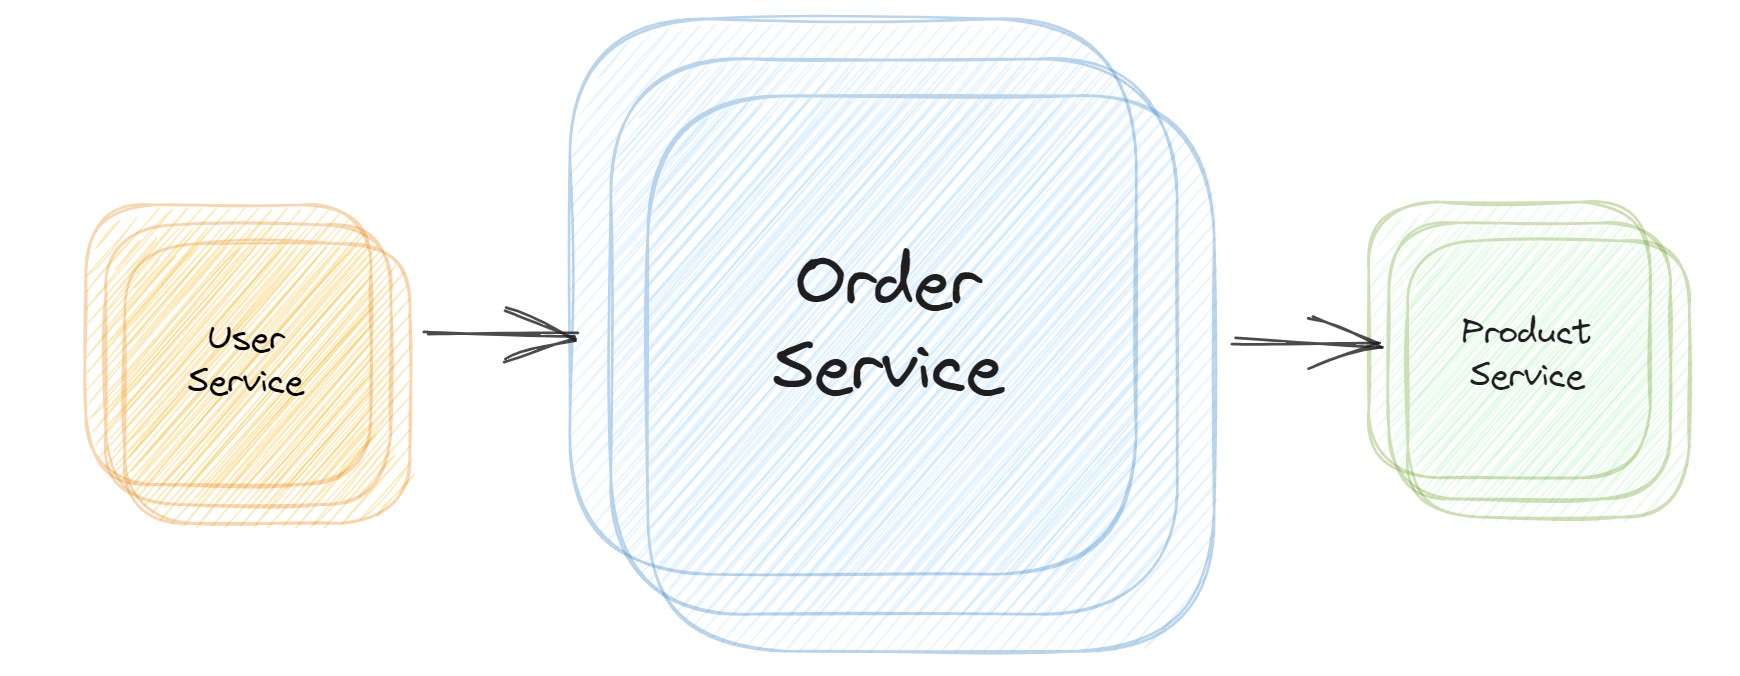 Diagram of microservice organization with vertical scaling.